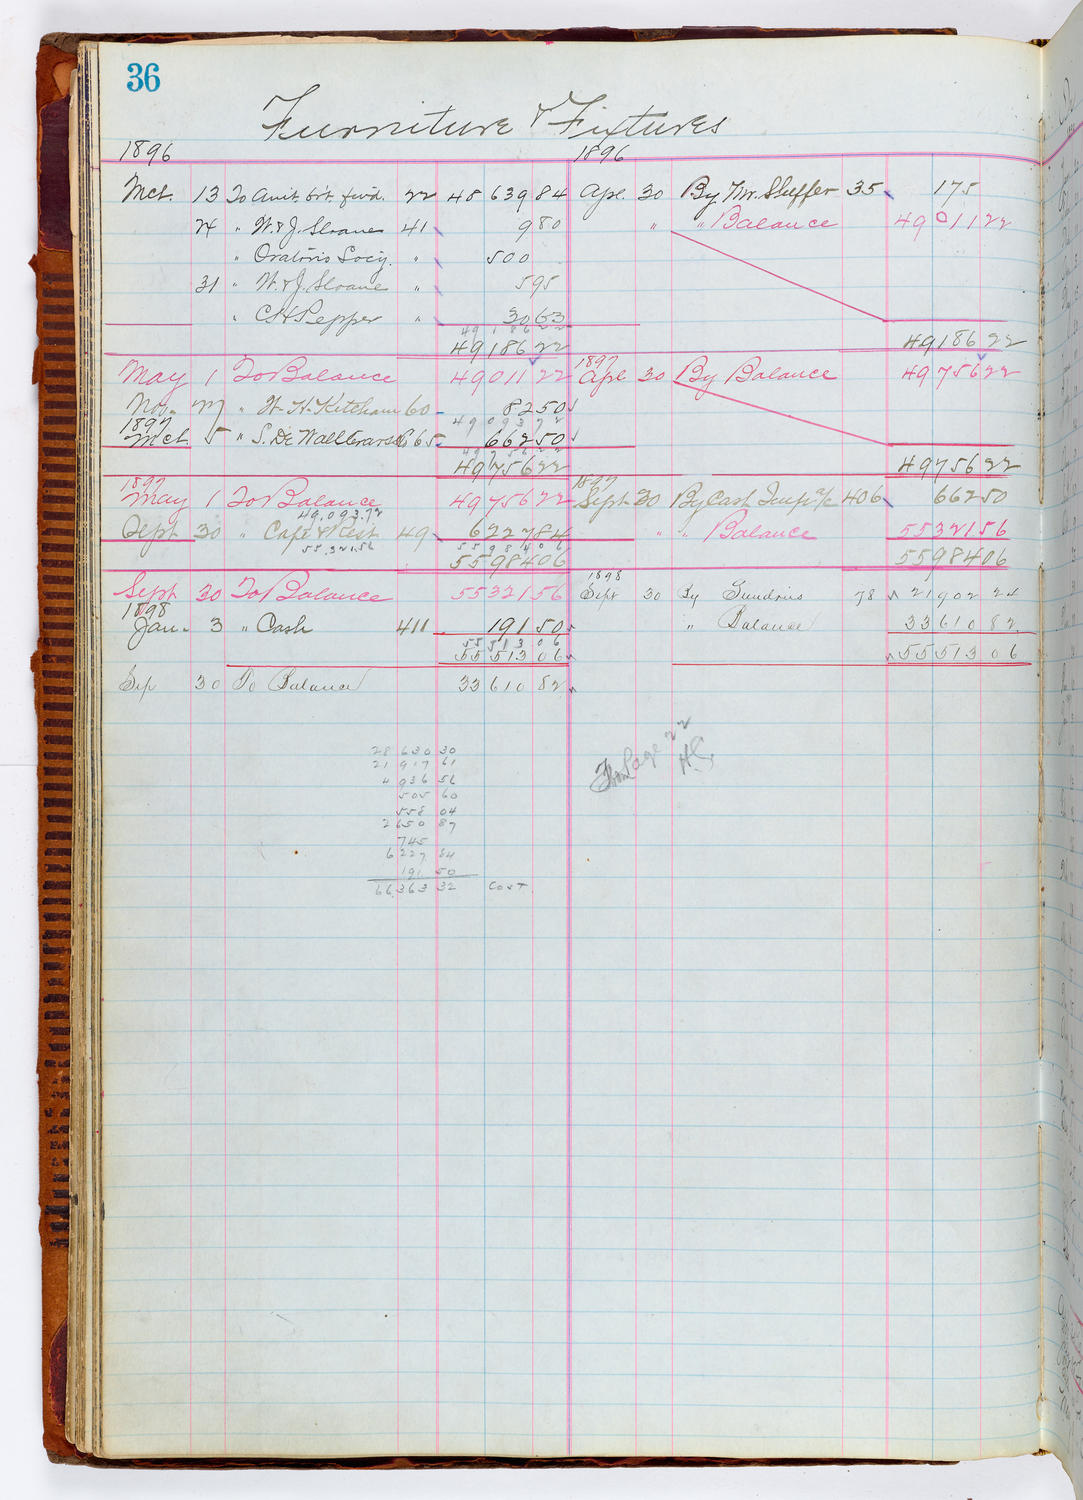 Music Hall Accounting Ledger, volume 1, page 36